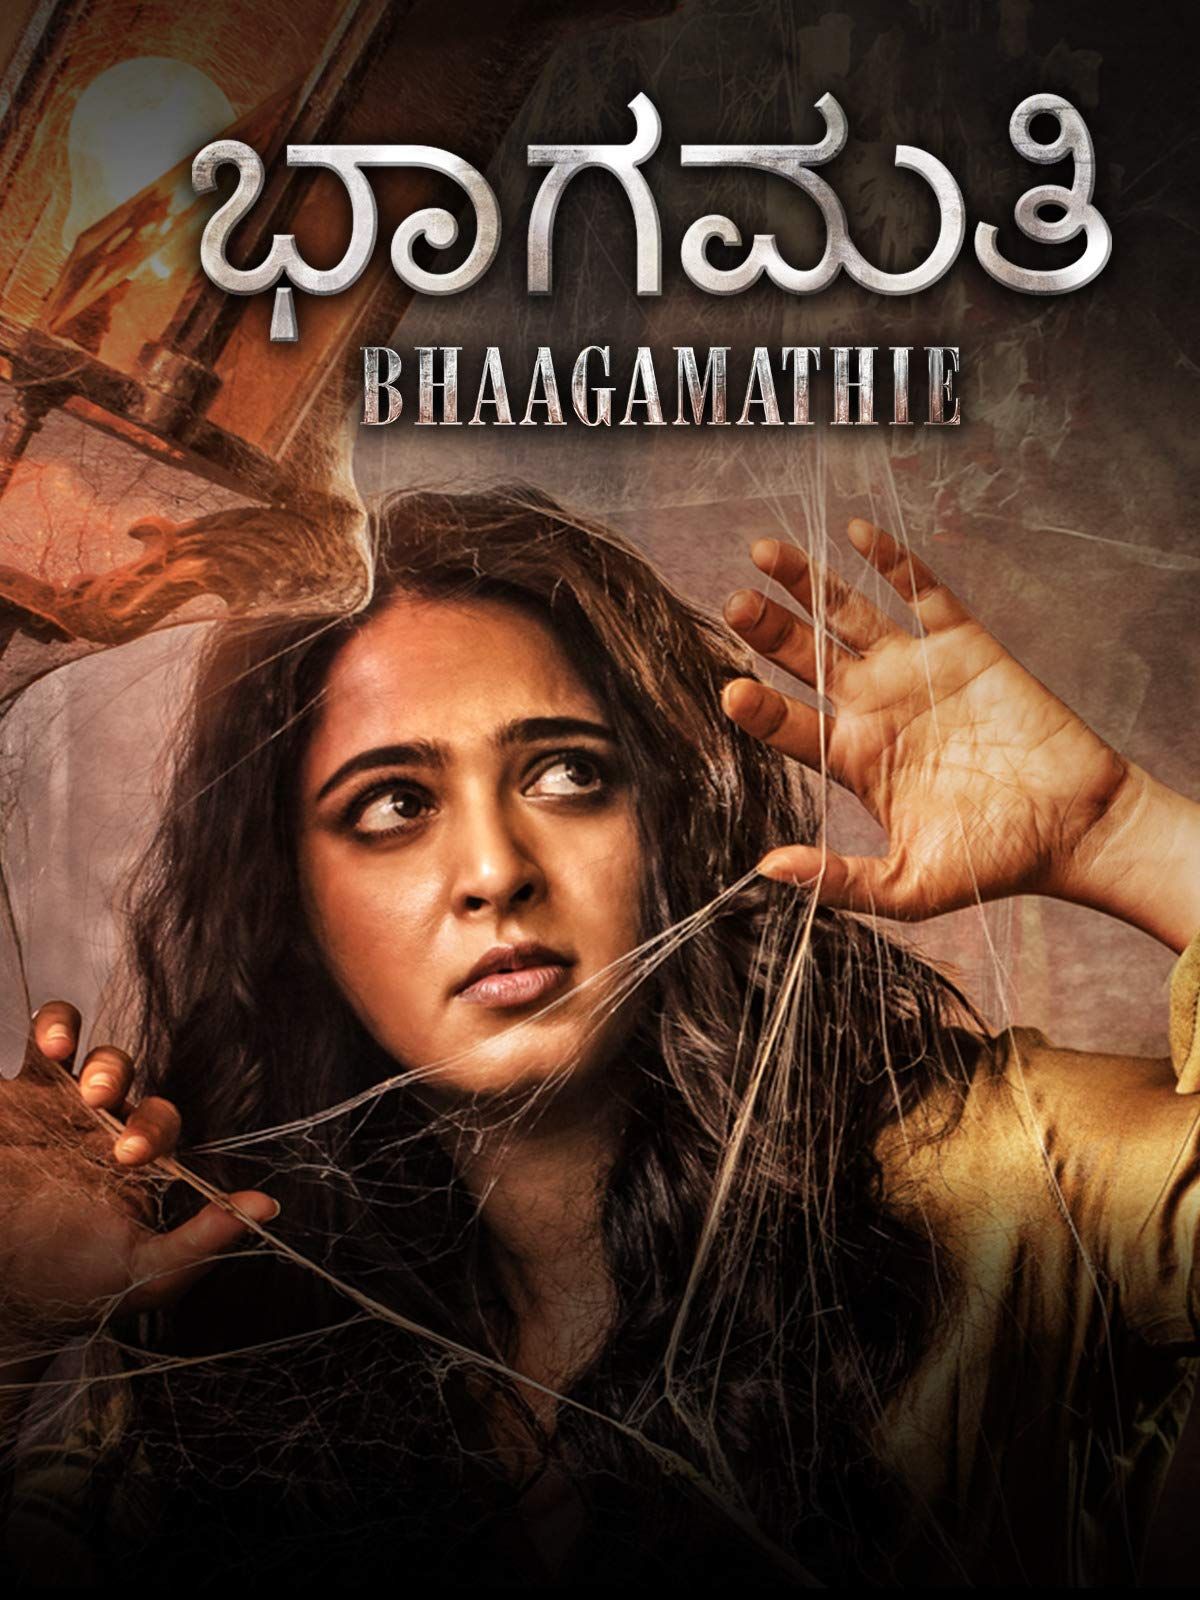 Bhaagamathie (2018) Hindi Dubbed UNCUT HDRip download full movie